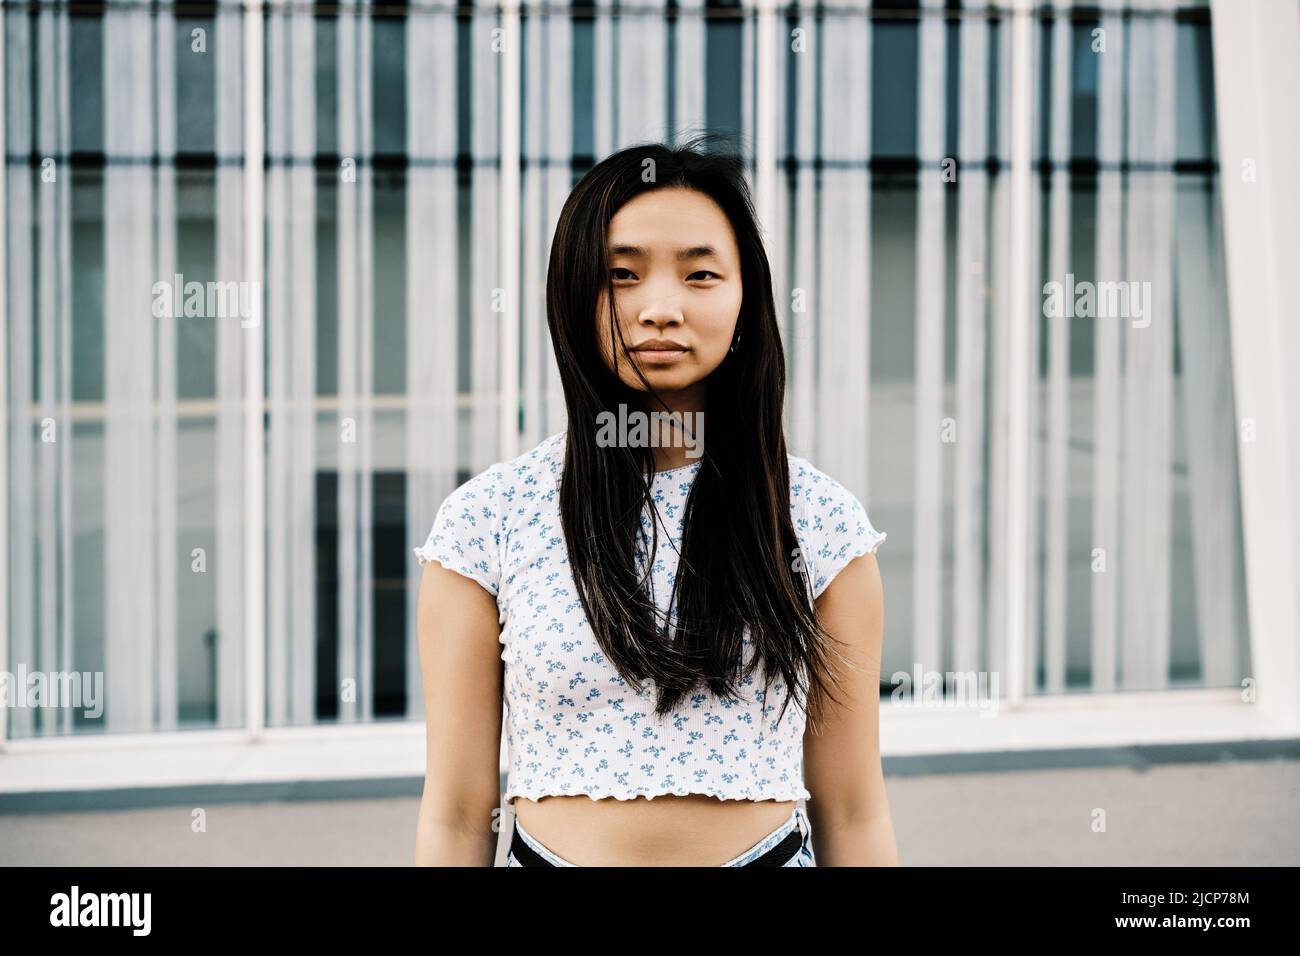 Portrait of a young Asian woman looking at camera while standing outdoors. Stock Photo